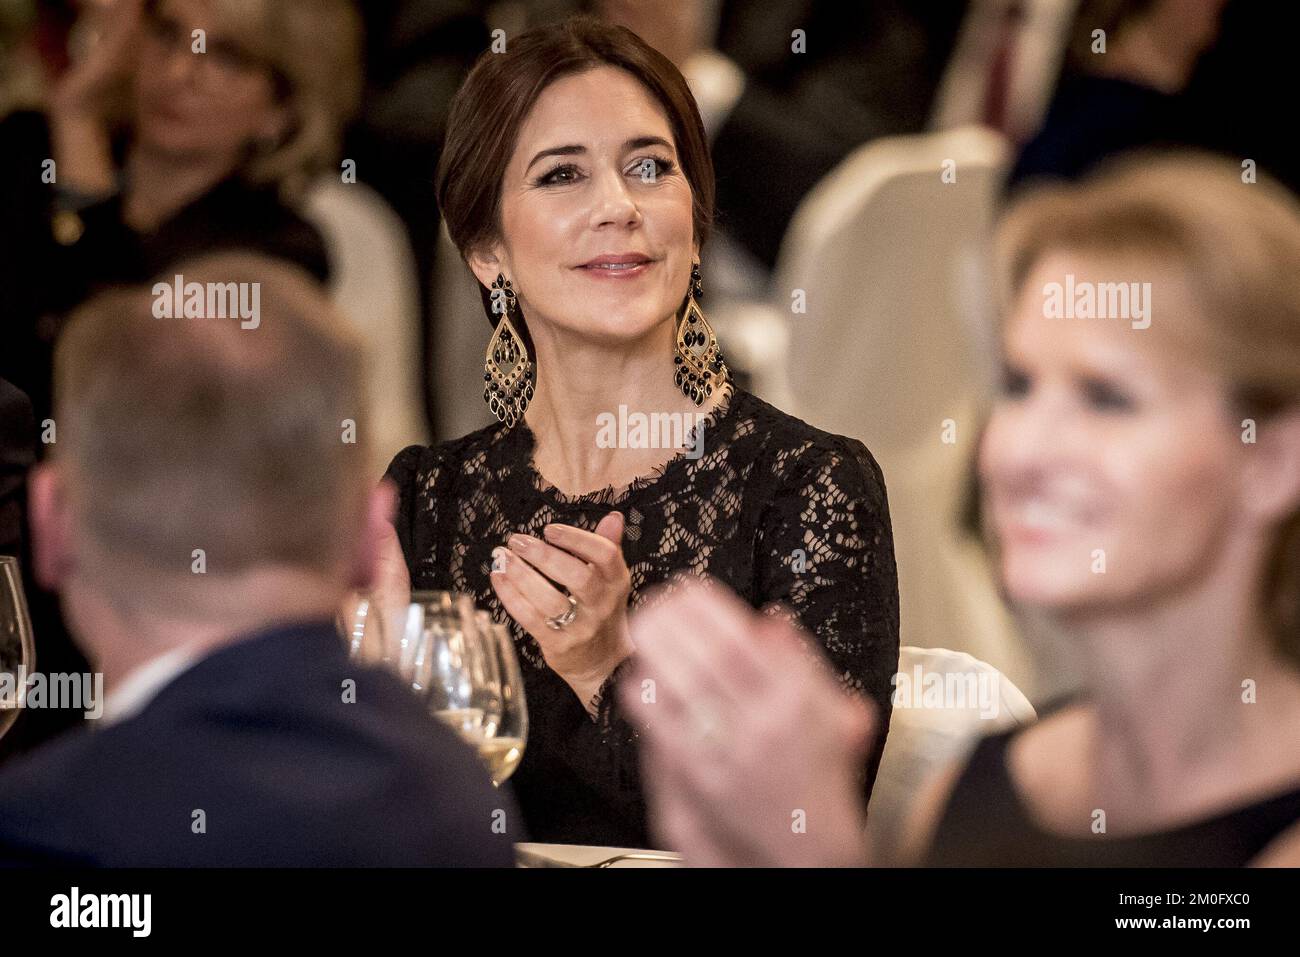 On November 7th 2018 TRH Crown Prince Frederik and Crown Princess Mary attended a grand dinner at the Waldorf Astoria in Rome. The Crown Prince Couple are part of a business delegation tour lasting from November 6th to 8th. Stock Photo